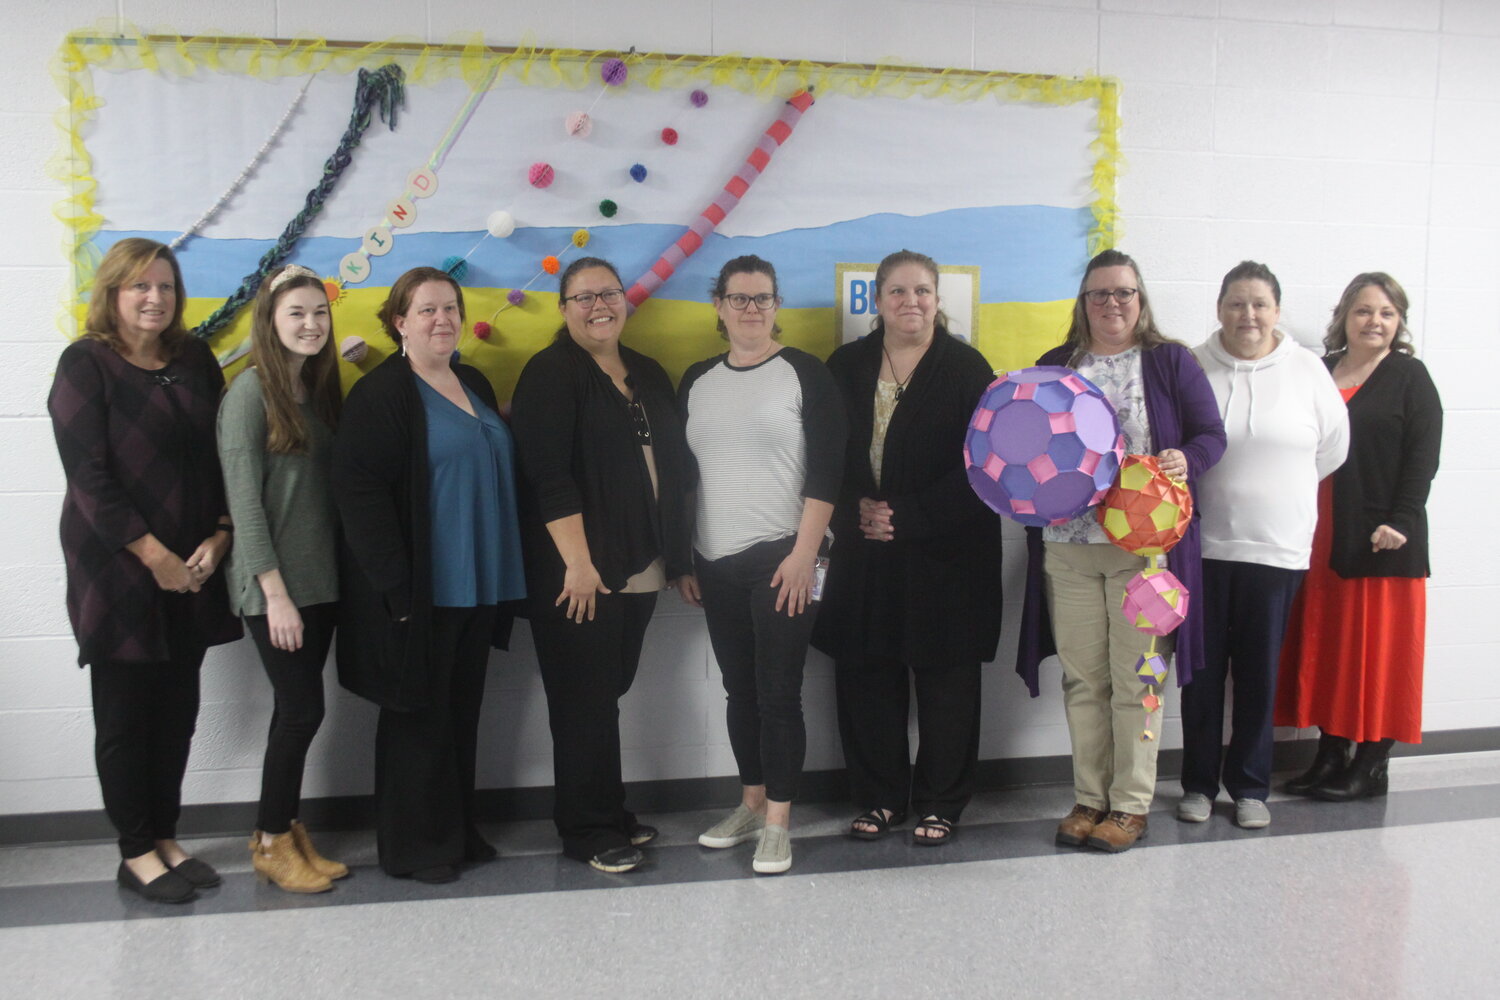 Kiwanis Mini Grant recipients pose at Jonesburg Elementary School on Nov. 9. They are, from left, Tina Harms, Kristin Scott, Angel Davis, Kristal Zerr, Jeanette Ventimiglia, Stefanie Combs, Bernie Bader, Patti Montalbano and Kista River. Not pictured are Jeanne Hudgens and Tina Cay.